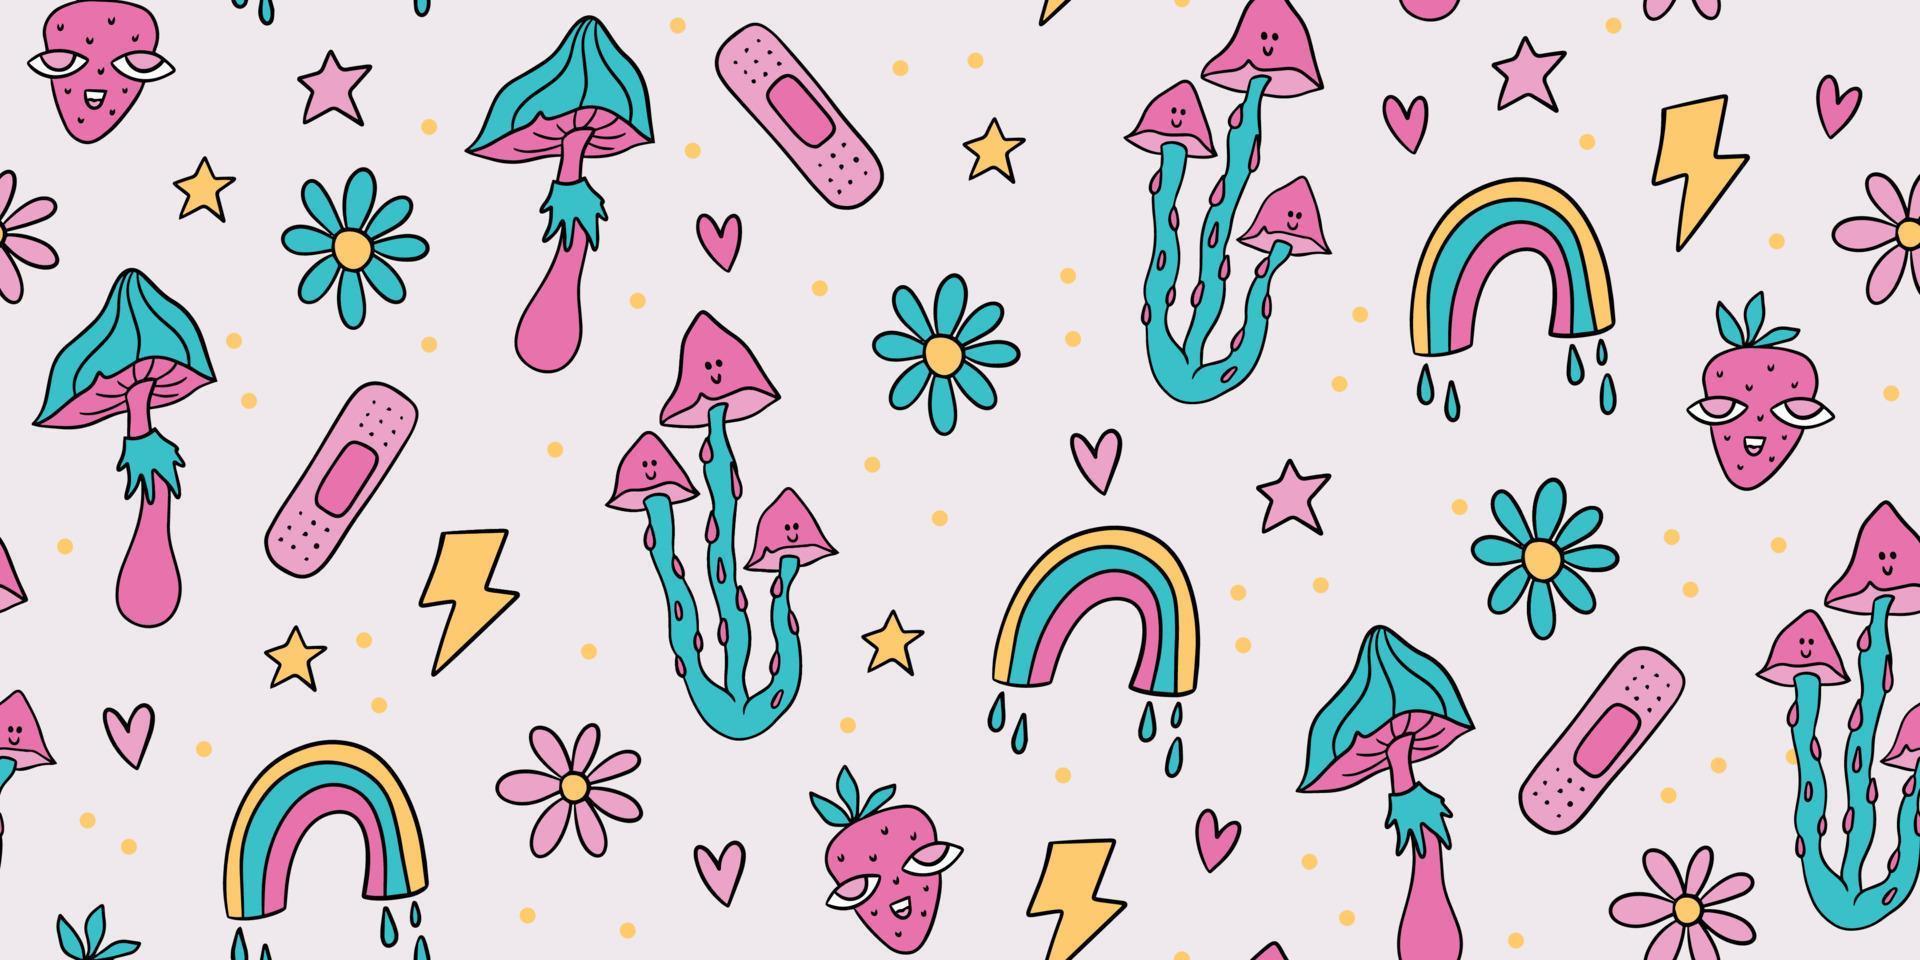 Funny retro Psychedelic Groovy seamless pattern. Vintage cartoon background with mushrooms, rainbow, lightning bolt, strawberry, stars, and hearts. Funky 60s - 70s elements vector